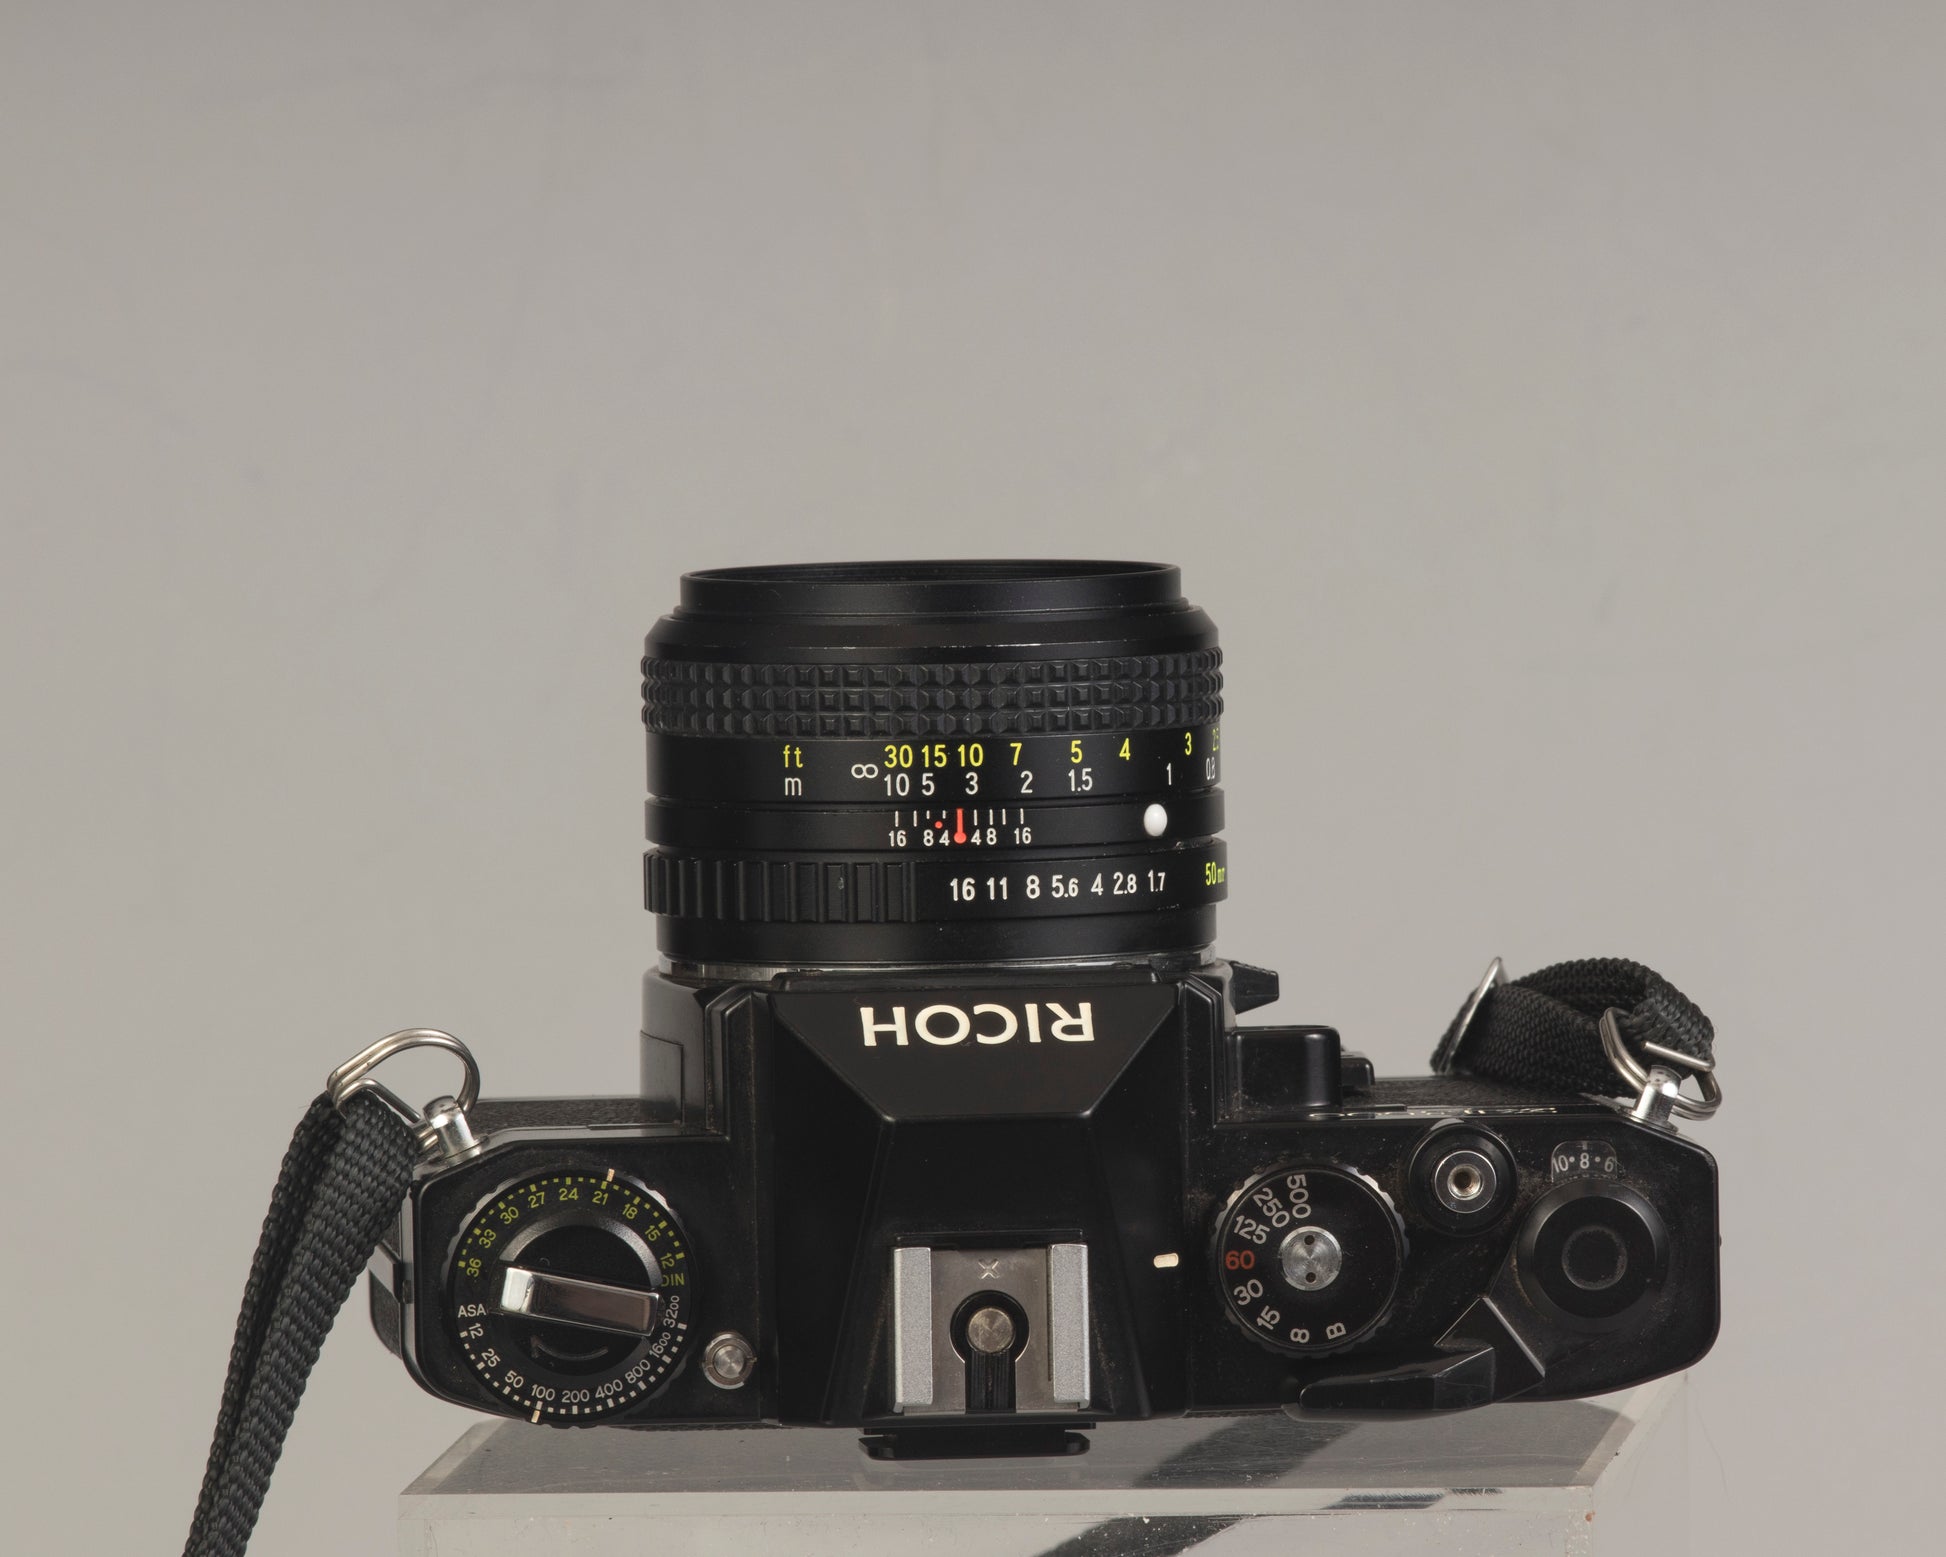 Ricoh XR-500 (aka KR-5) with Auto Sears MC 50mm f1.7 (a rebranded Ricoh lens) - top view